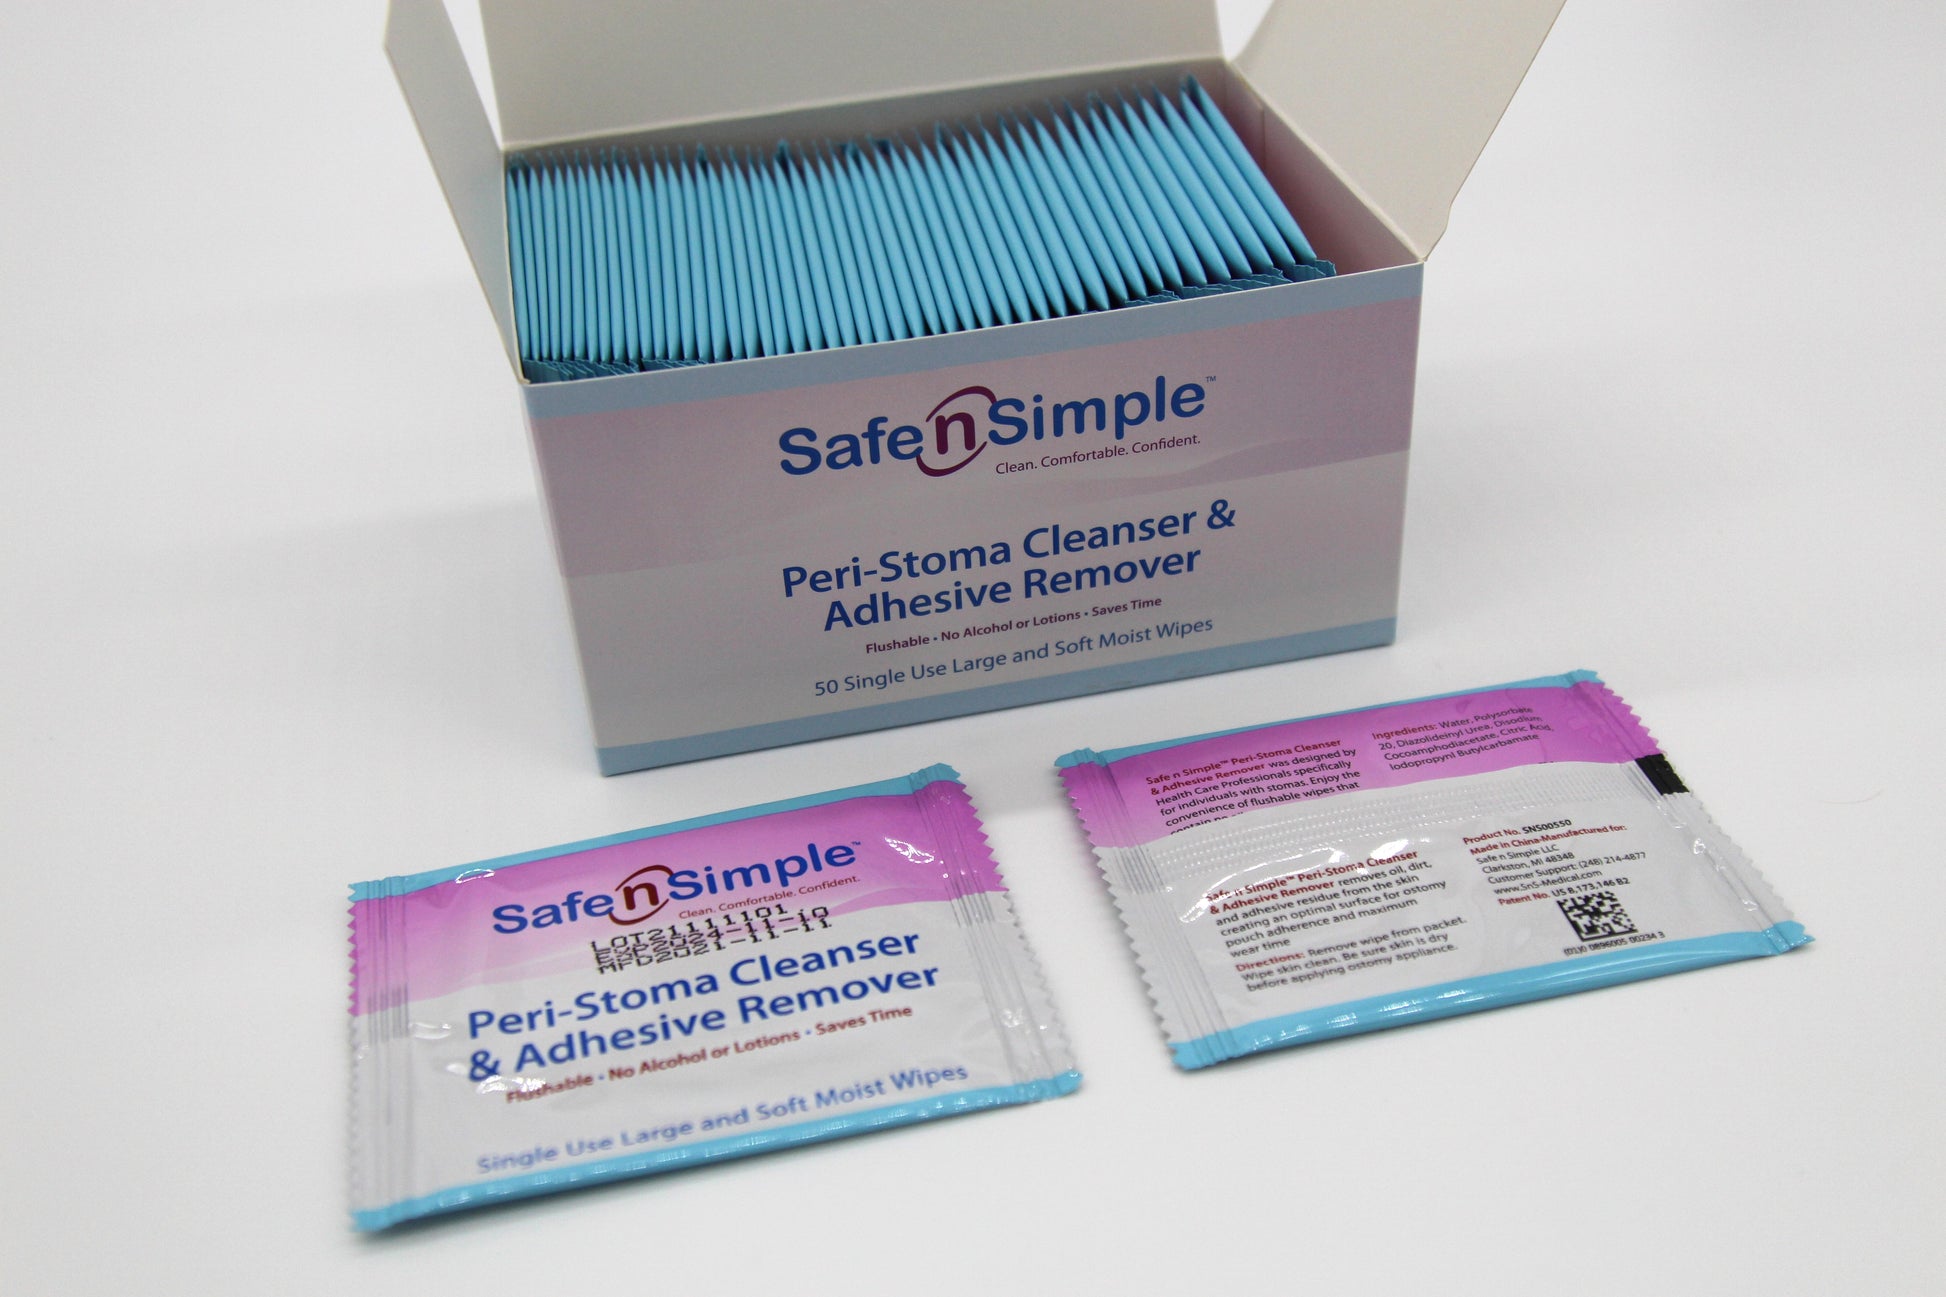 Safe n' Simple Adhesive Remover for Skin - 5x7 5 Wipes - Stoma Adhesive  Remover Wipes - Alcohol Free Wipes for Sensitive Skin - No Sting Adhesive  Remover Wipes 